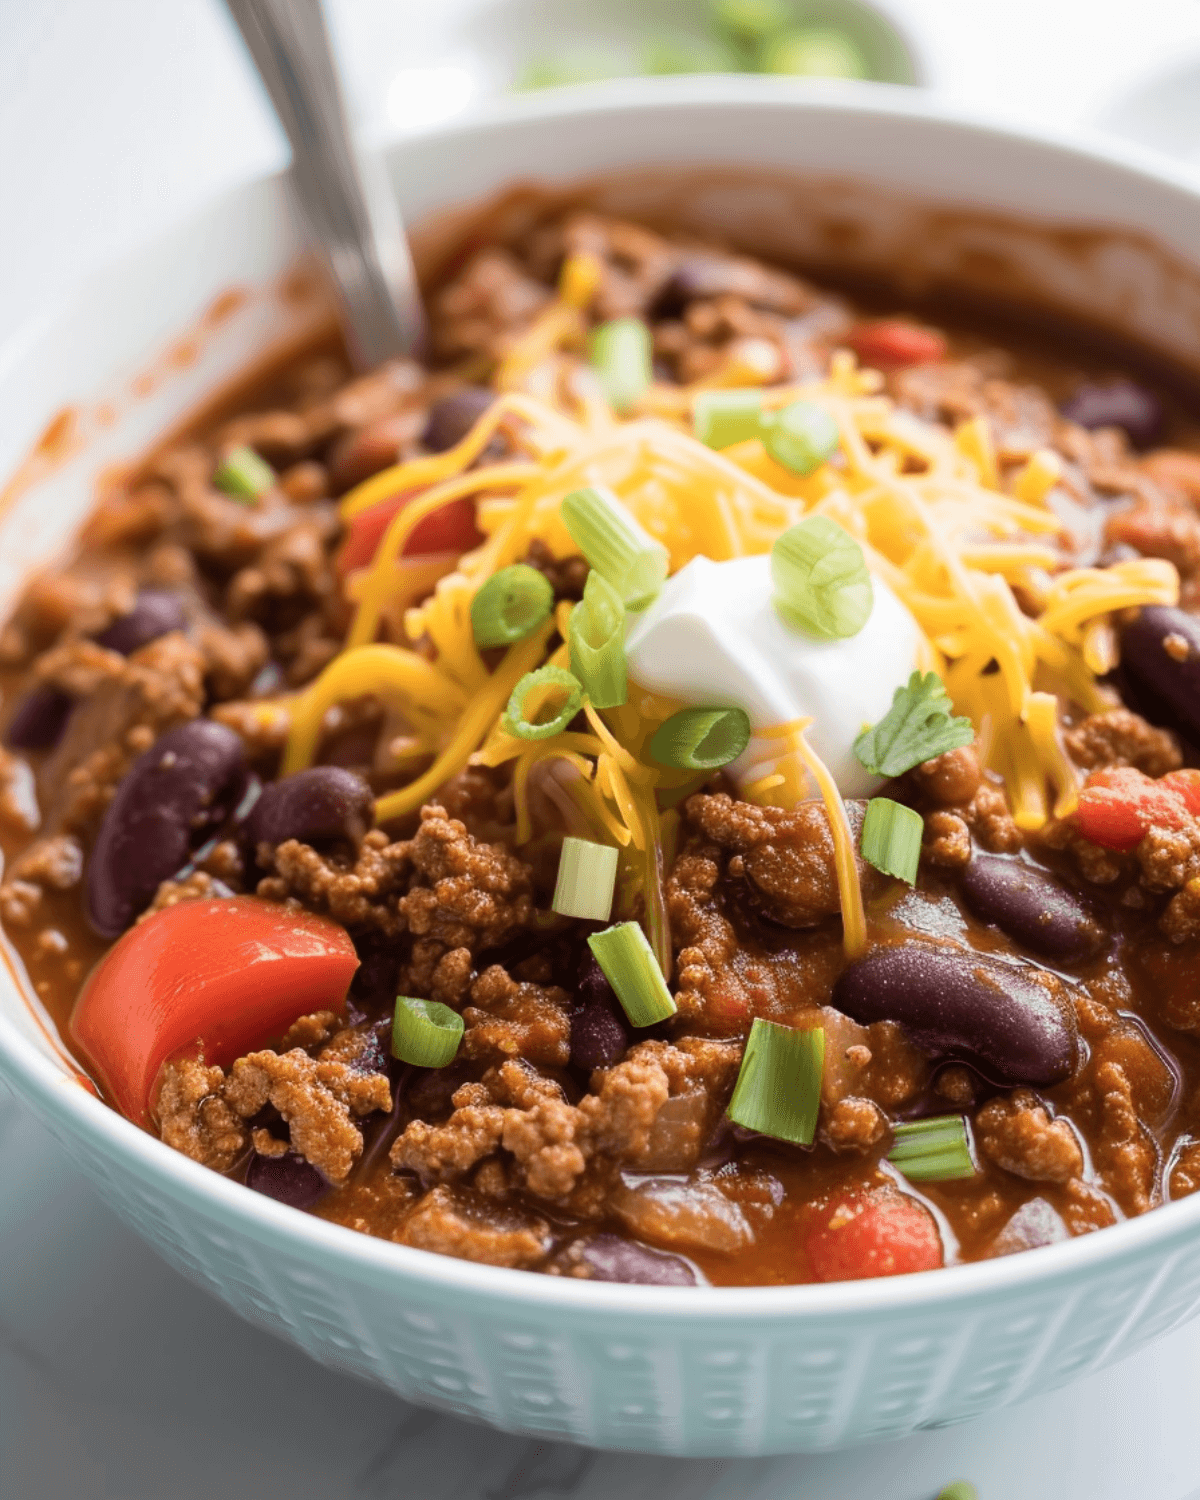 Venison chili in a white bowl topped with sour cream and cheese.